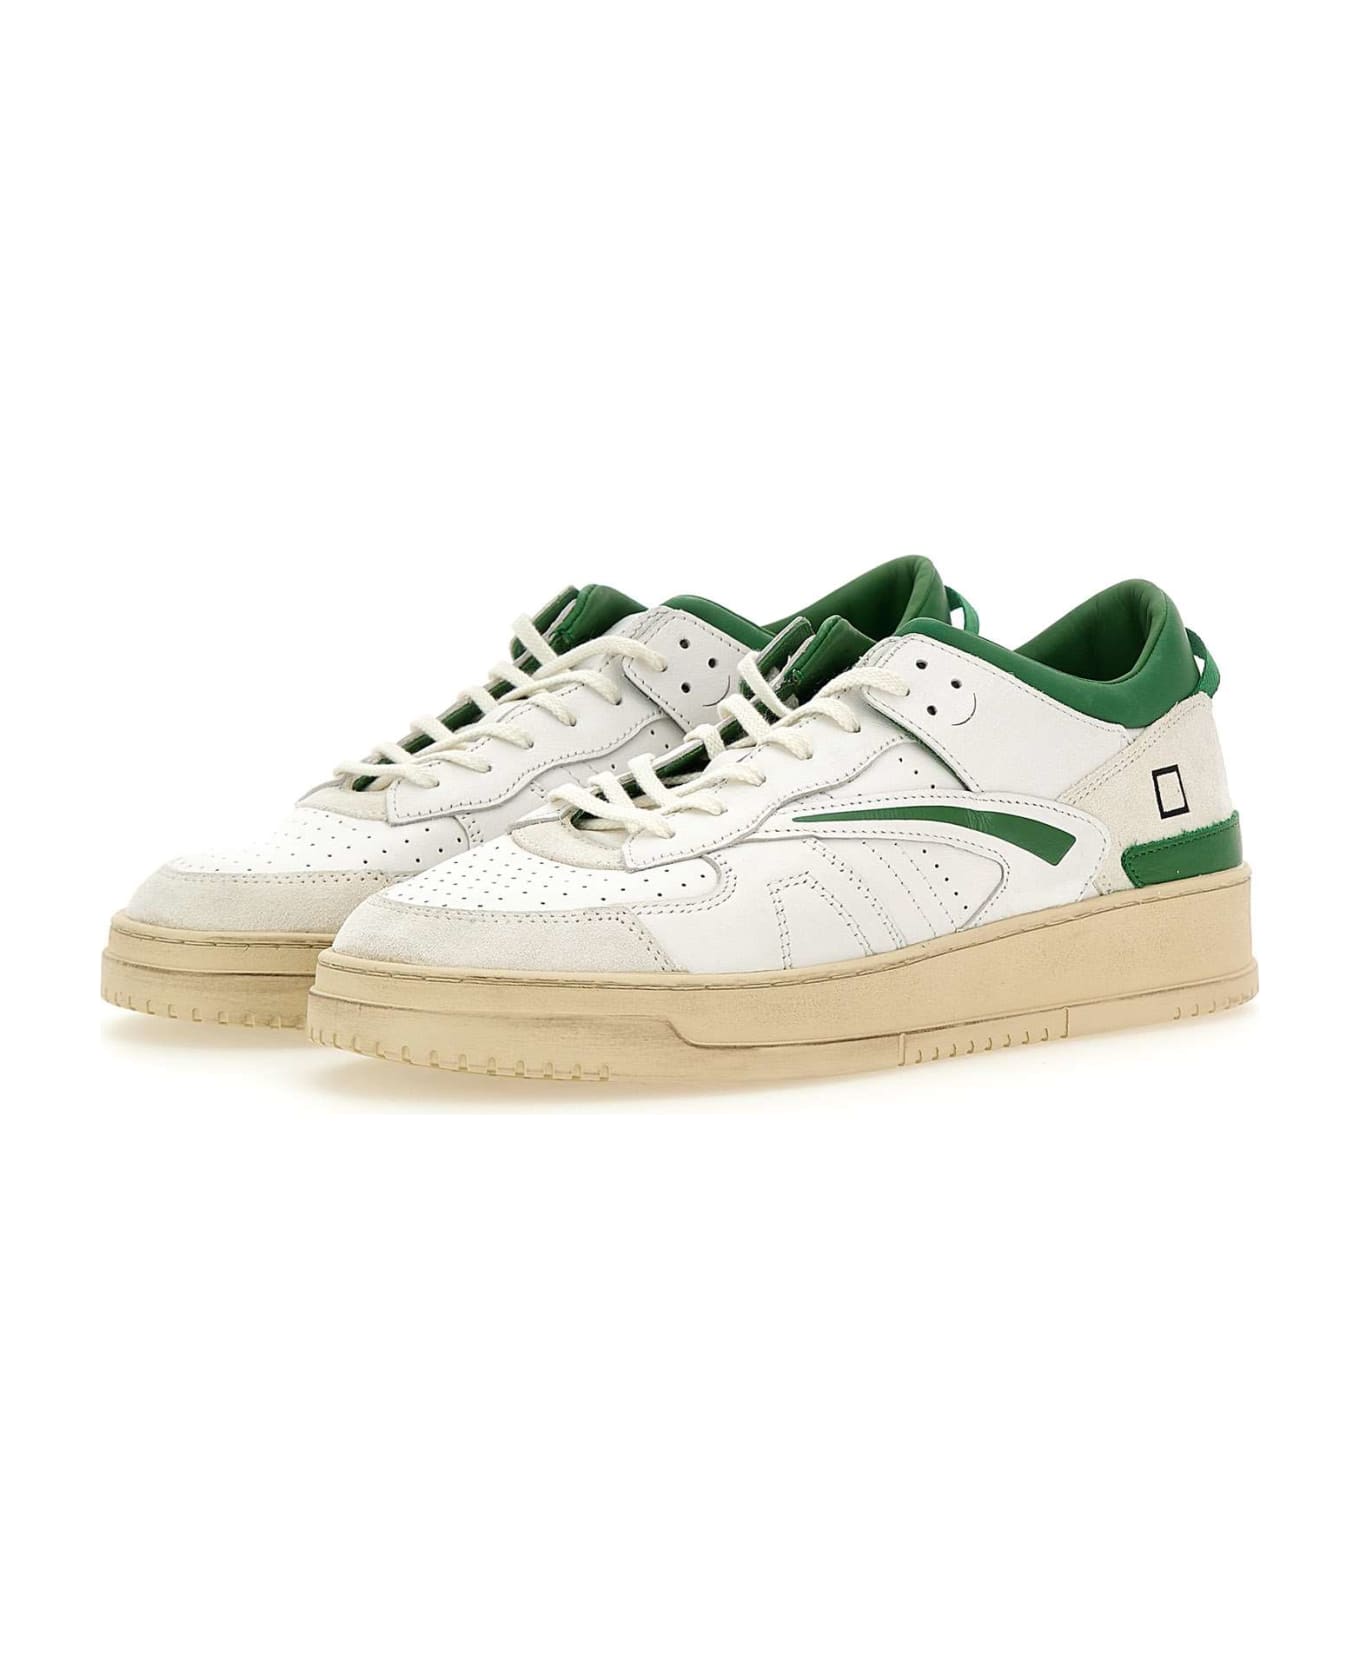 D.A.T.E. "torneo" Leather Sneakers - WHITE